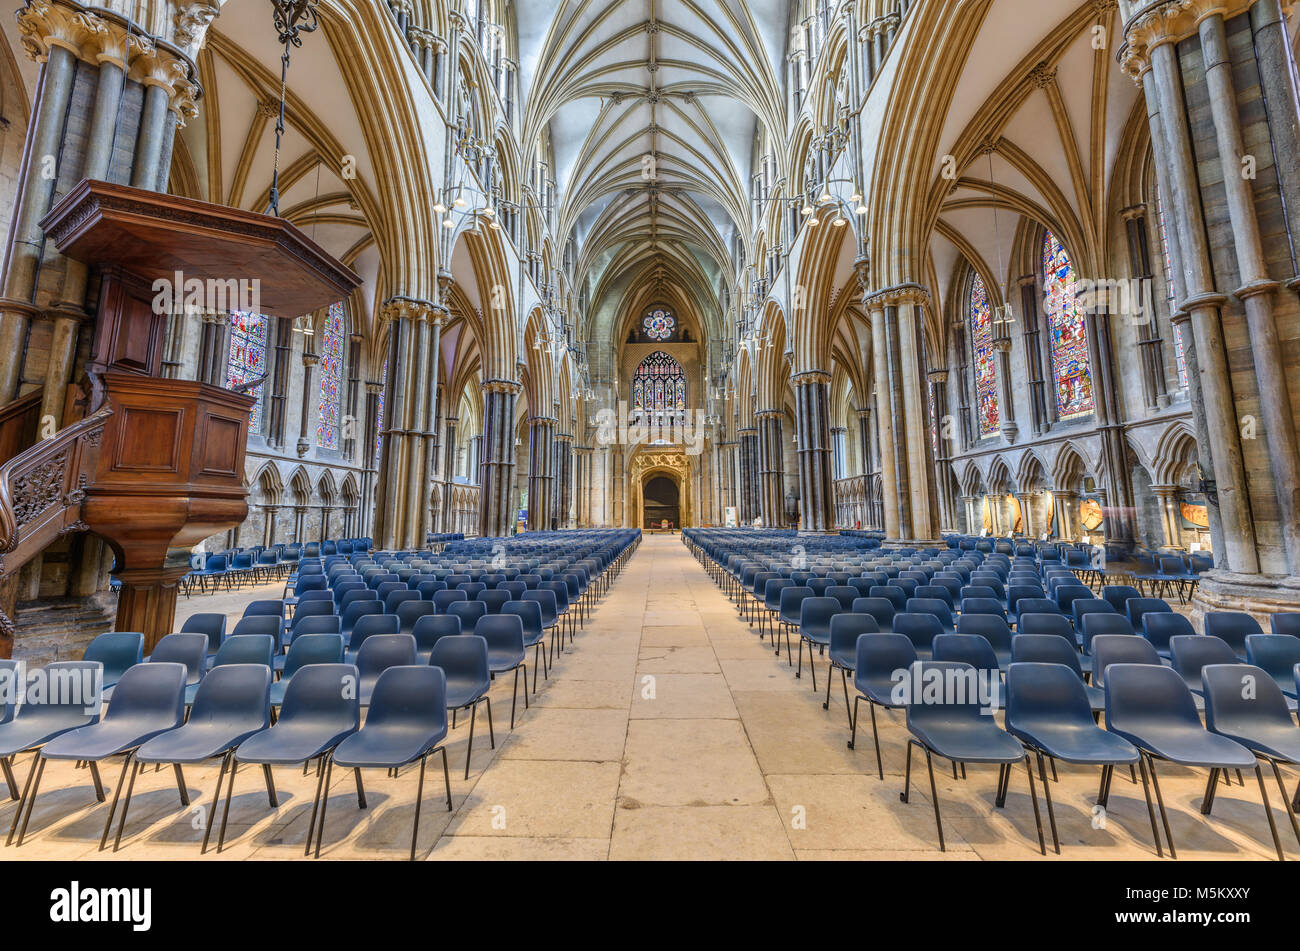 The nave looking towards the west end of the medieval christian cathedral built by the normans at Lincoln, England. Stock Photo